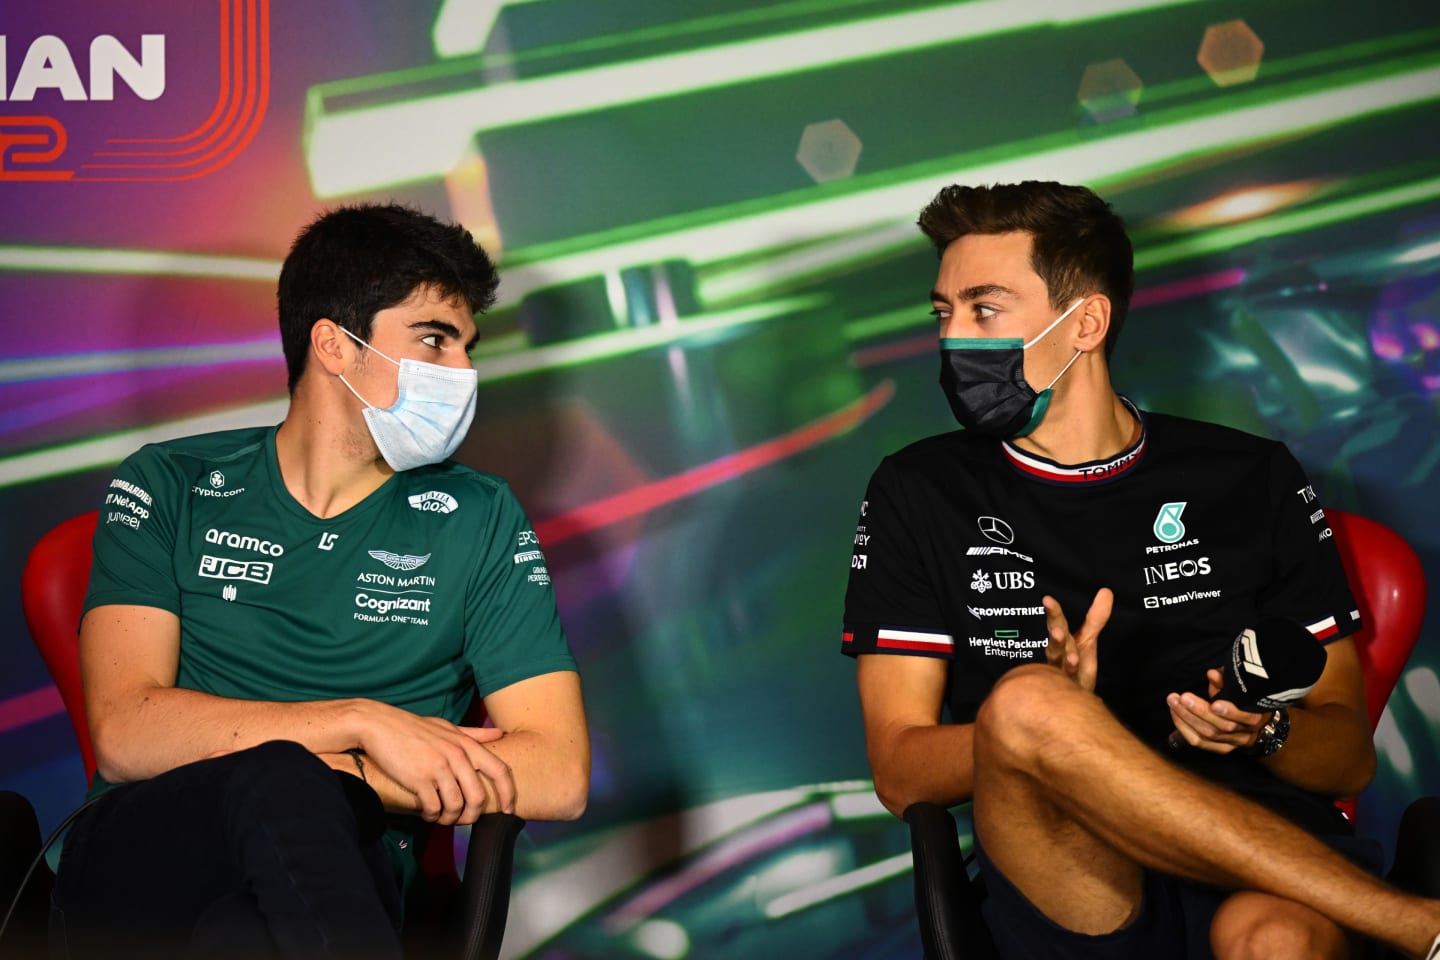 JEDDAH, SAUDI ARABIA - MARCH 25: Lance Stroll of Canada and Aston Martin F1 Team and George Russell of Great Britain and Mercedes talk in the Drivers Press Conference before practice ahead of the F1 Grand Prix of Saudi Arabia at the Jeddah Corniche Circuit on March 25, 2022 in Jeddah, Saudi Arabia. (Photo by Clive Mason/Getty Images)